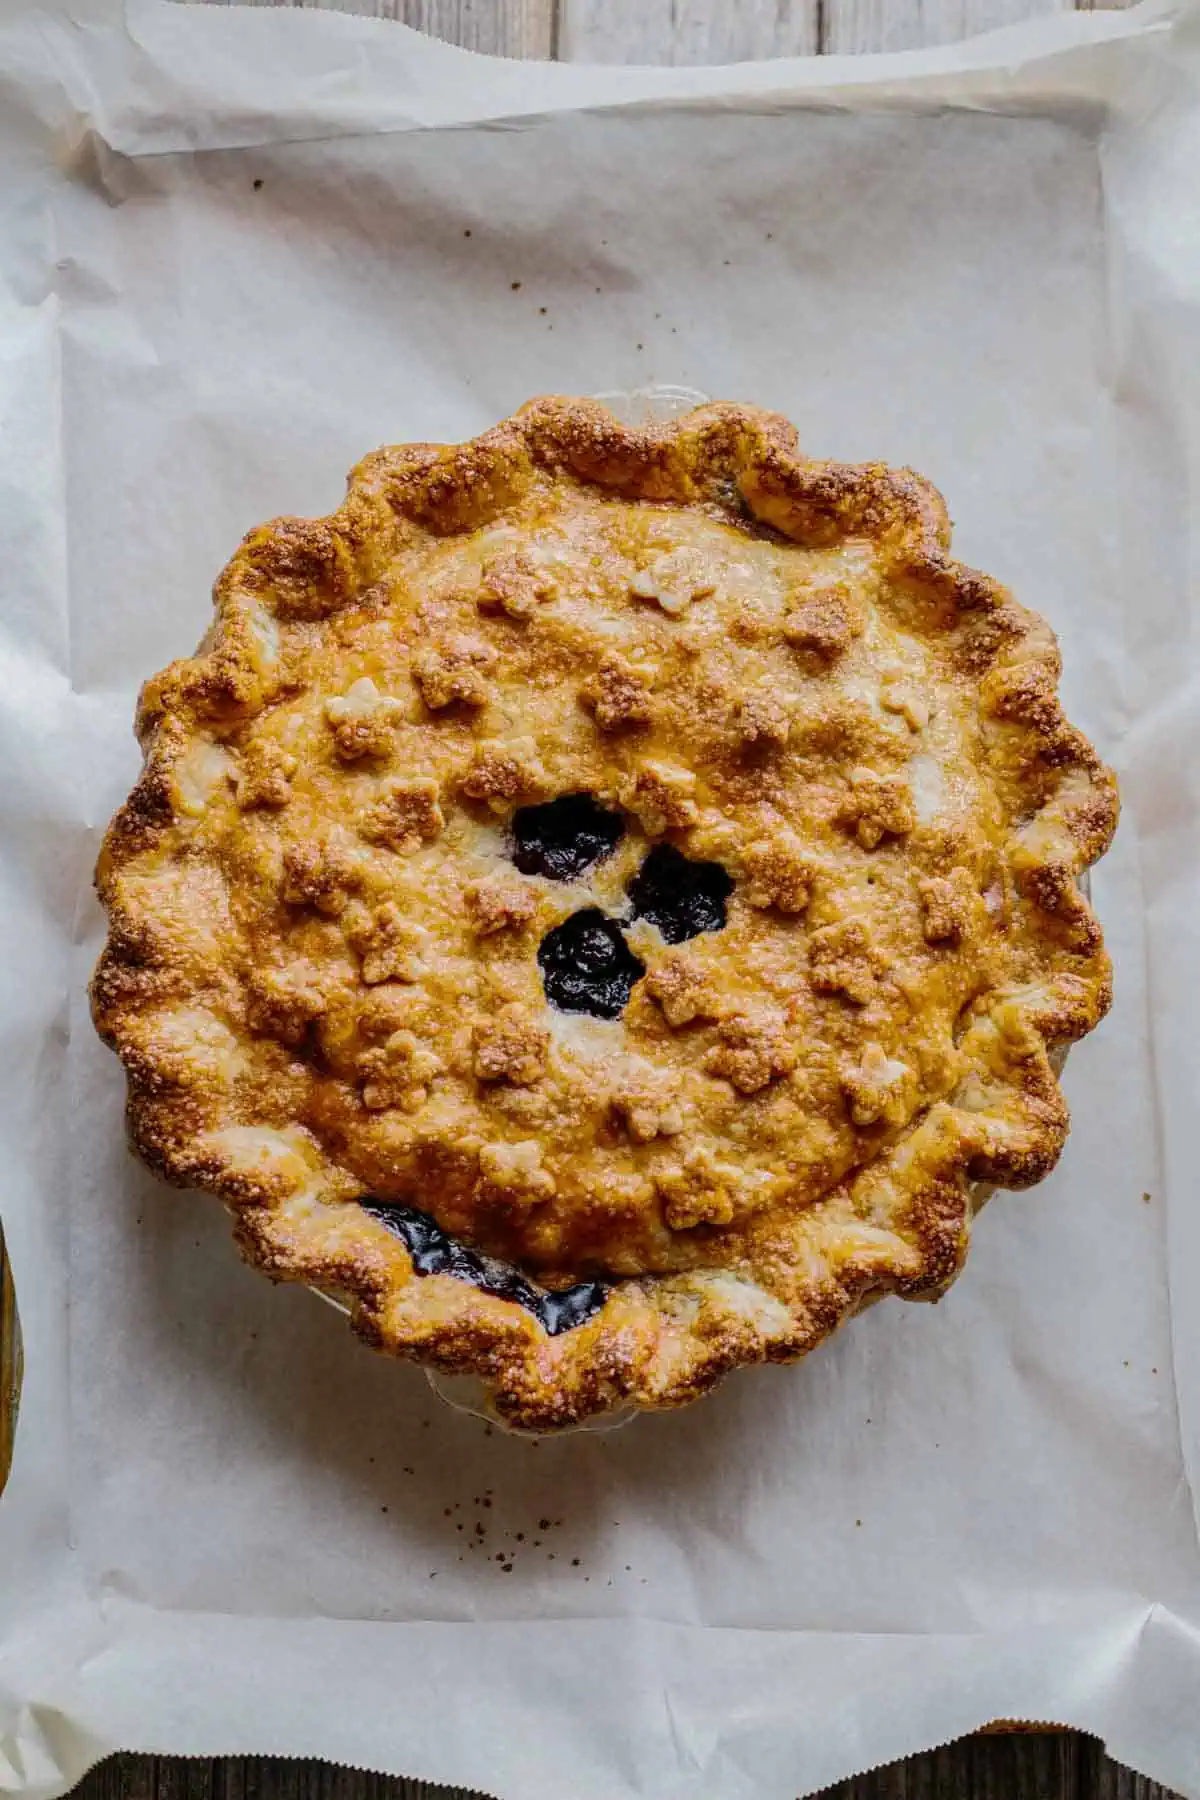 A whole old fashioned double-crust blueberry pie baked to perfection.